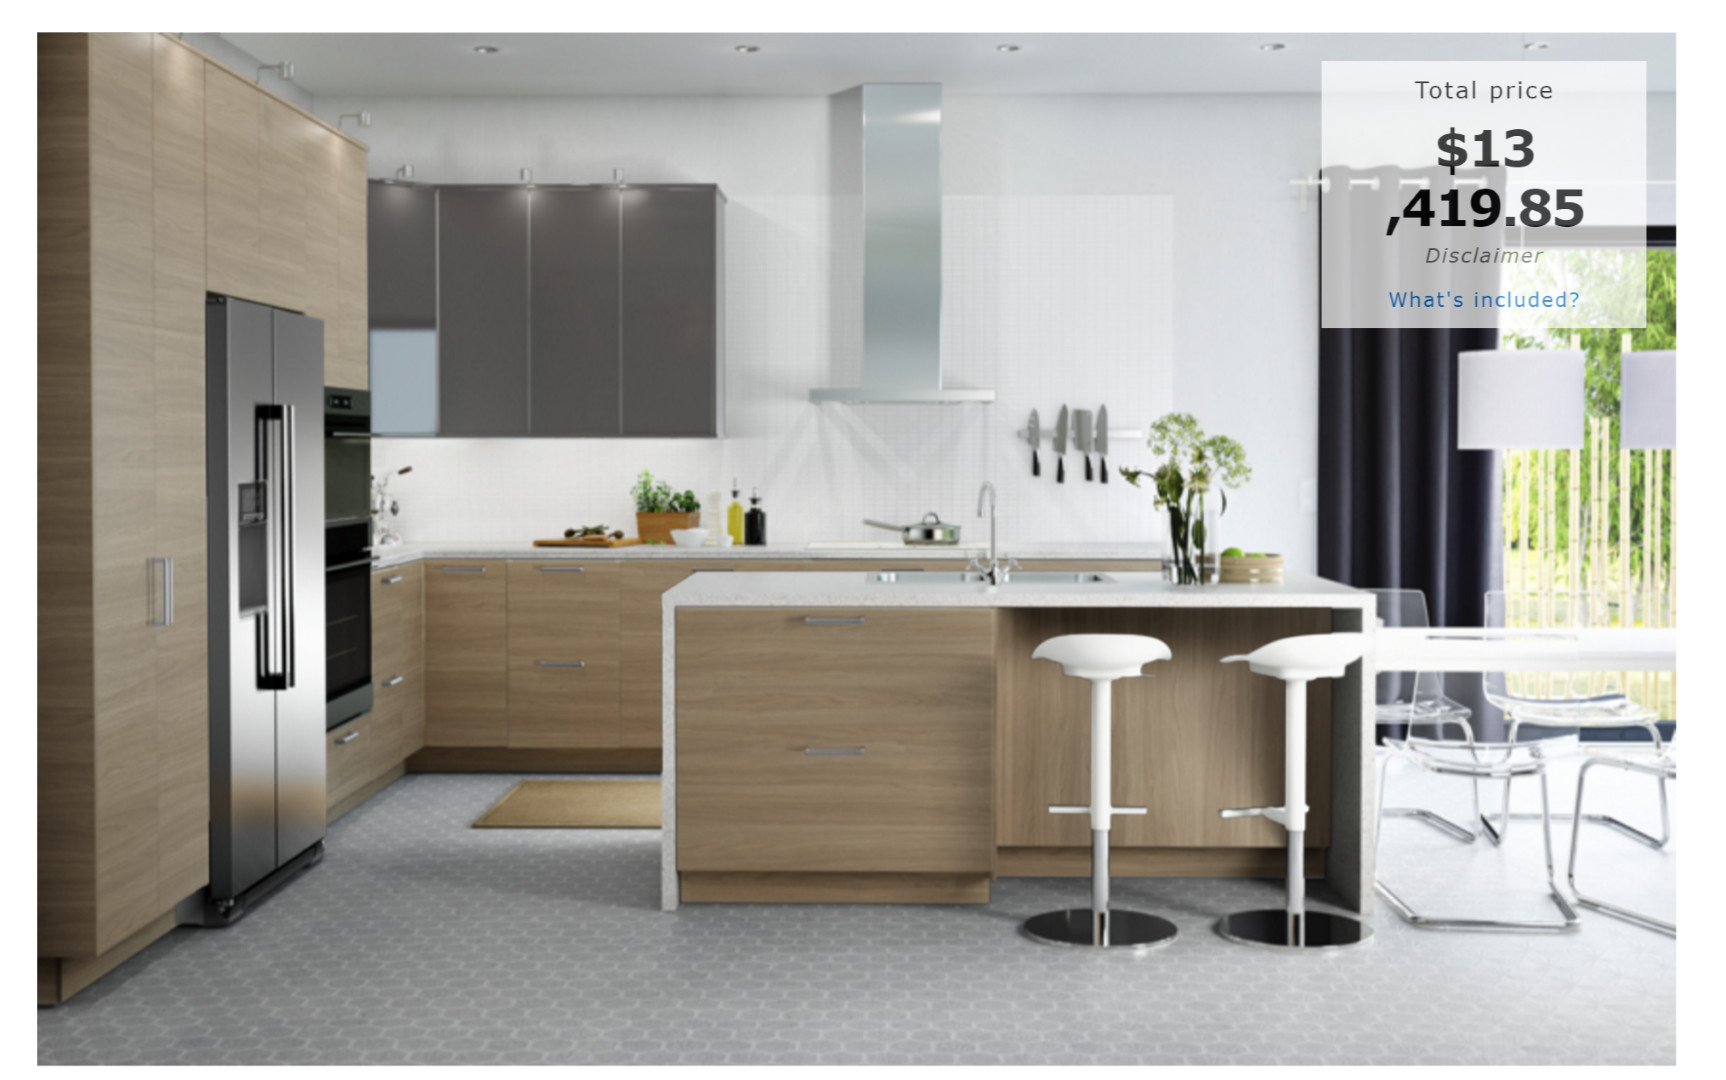 Ikea Kitchen Remodel Cost
 How Much Will an IKEA Kitchen Cost